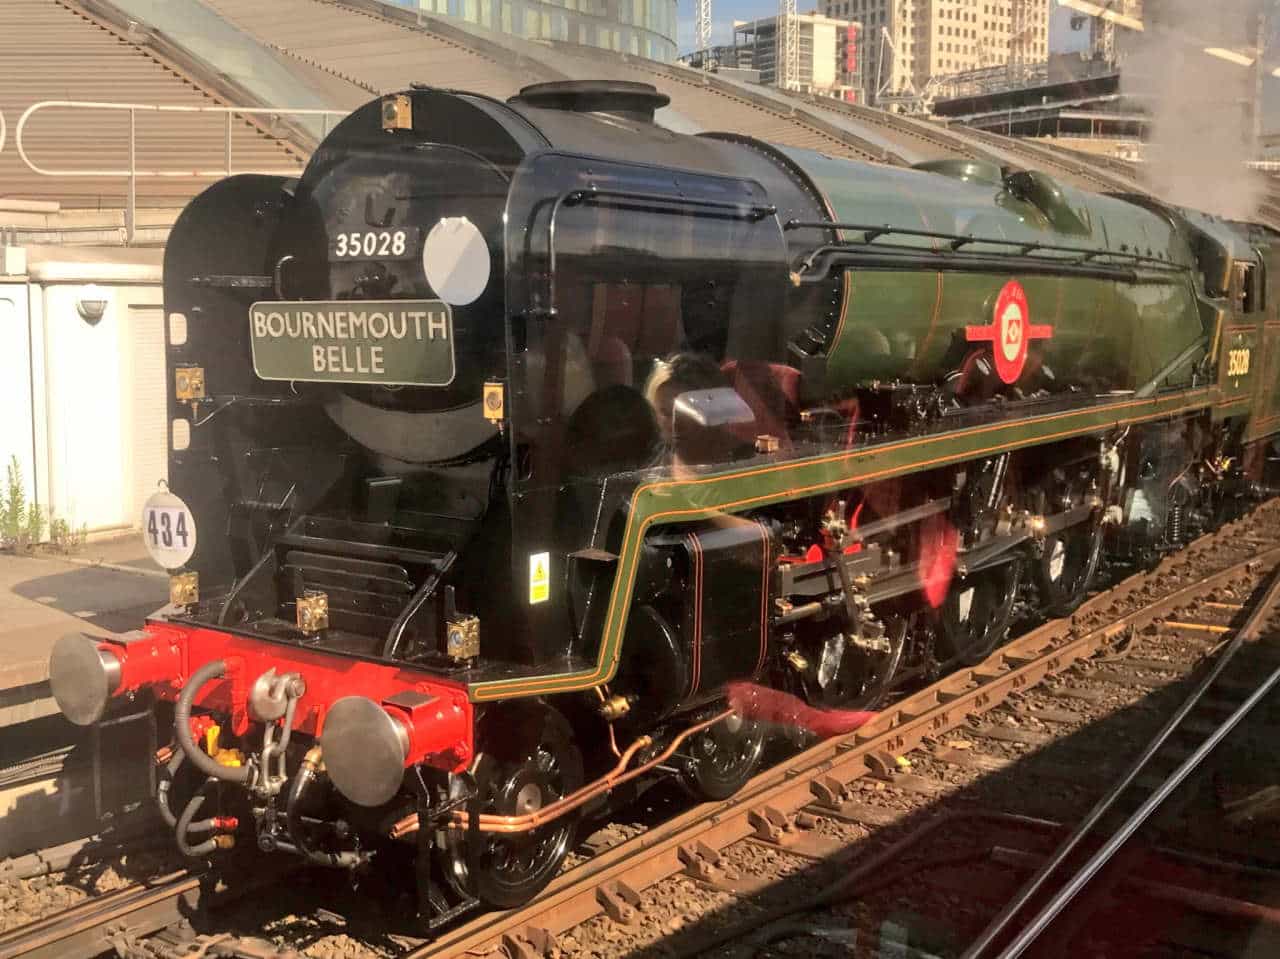 35028 Clan Line with the Bournemouth Belle